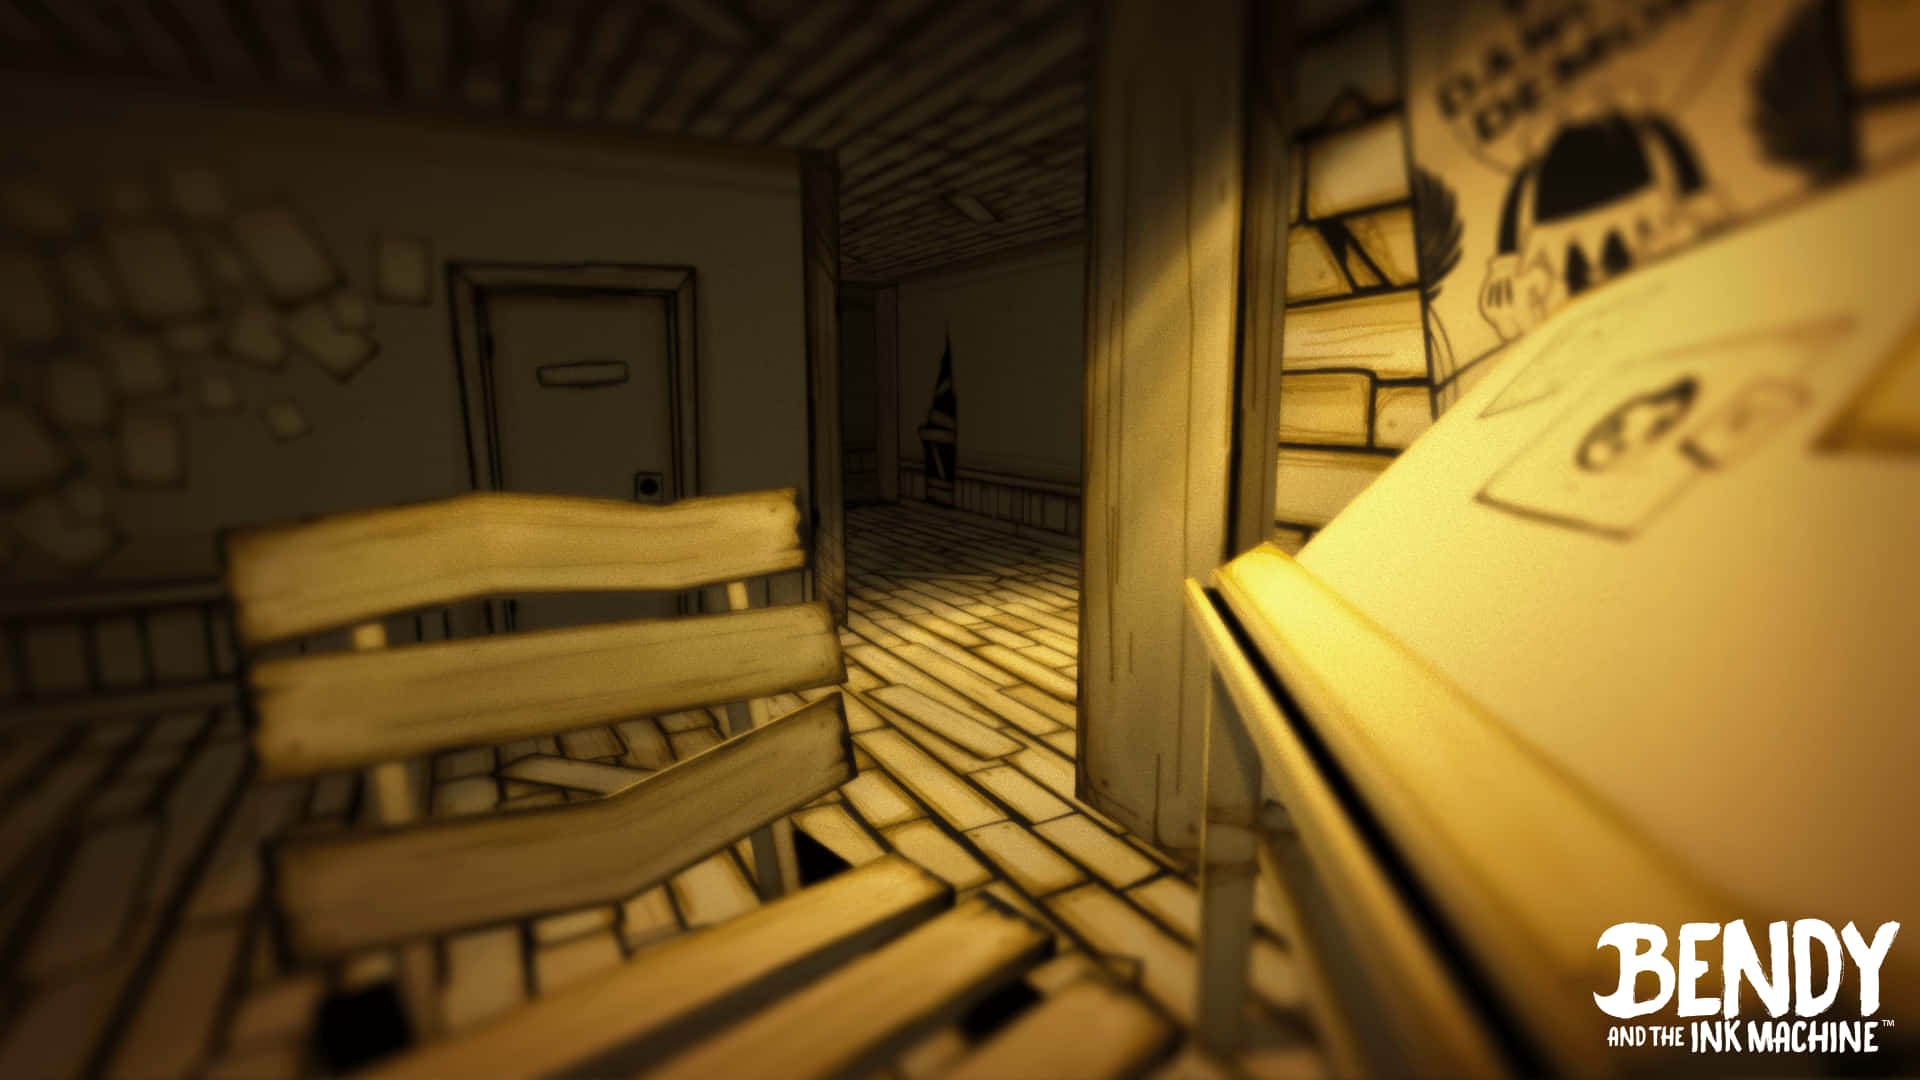 Bendy And The Ink Machine Wooden Chair Wallpaper